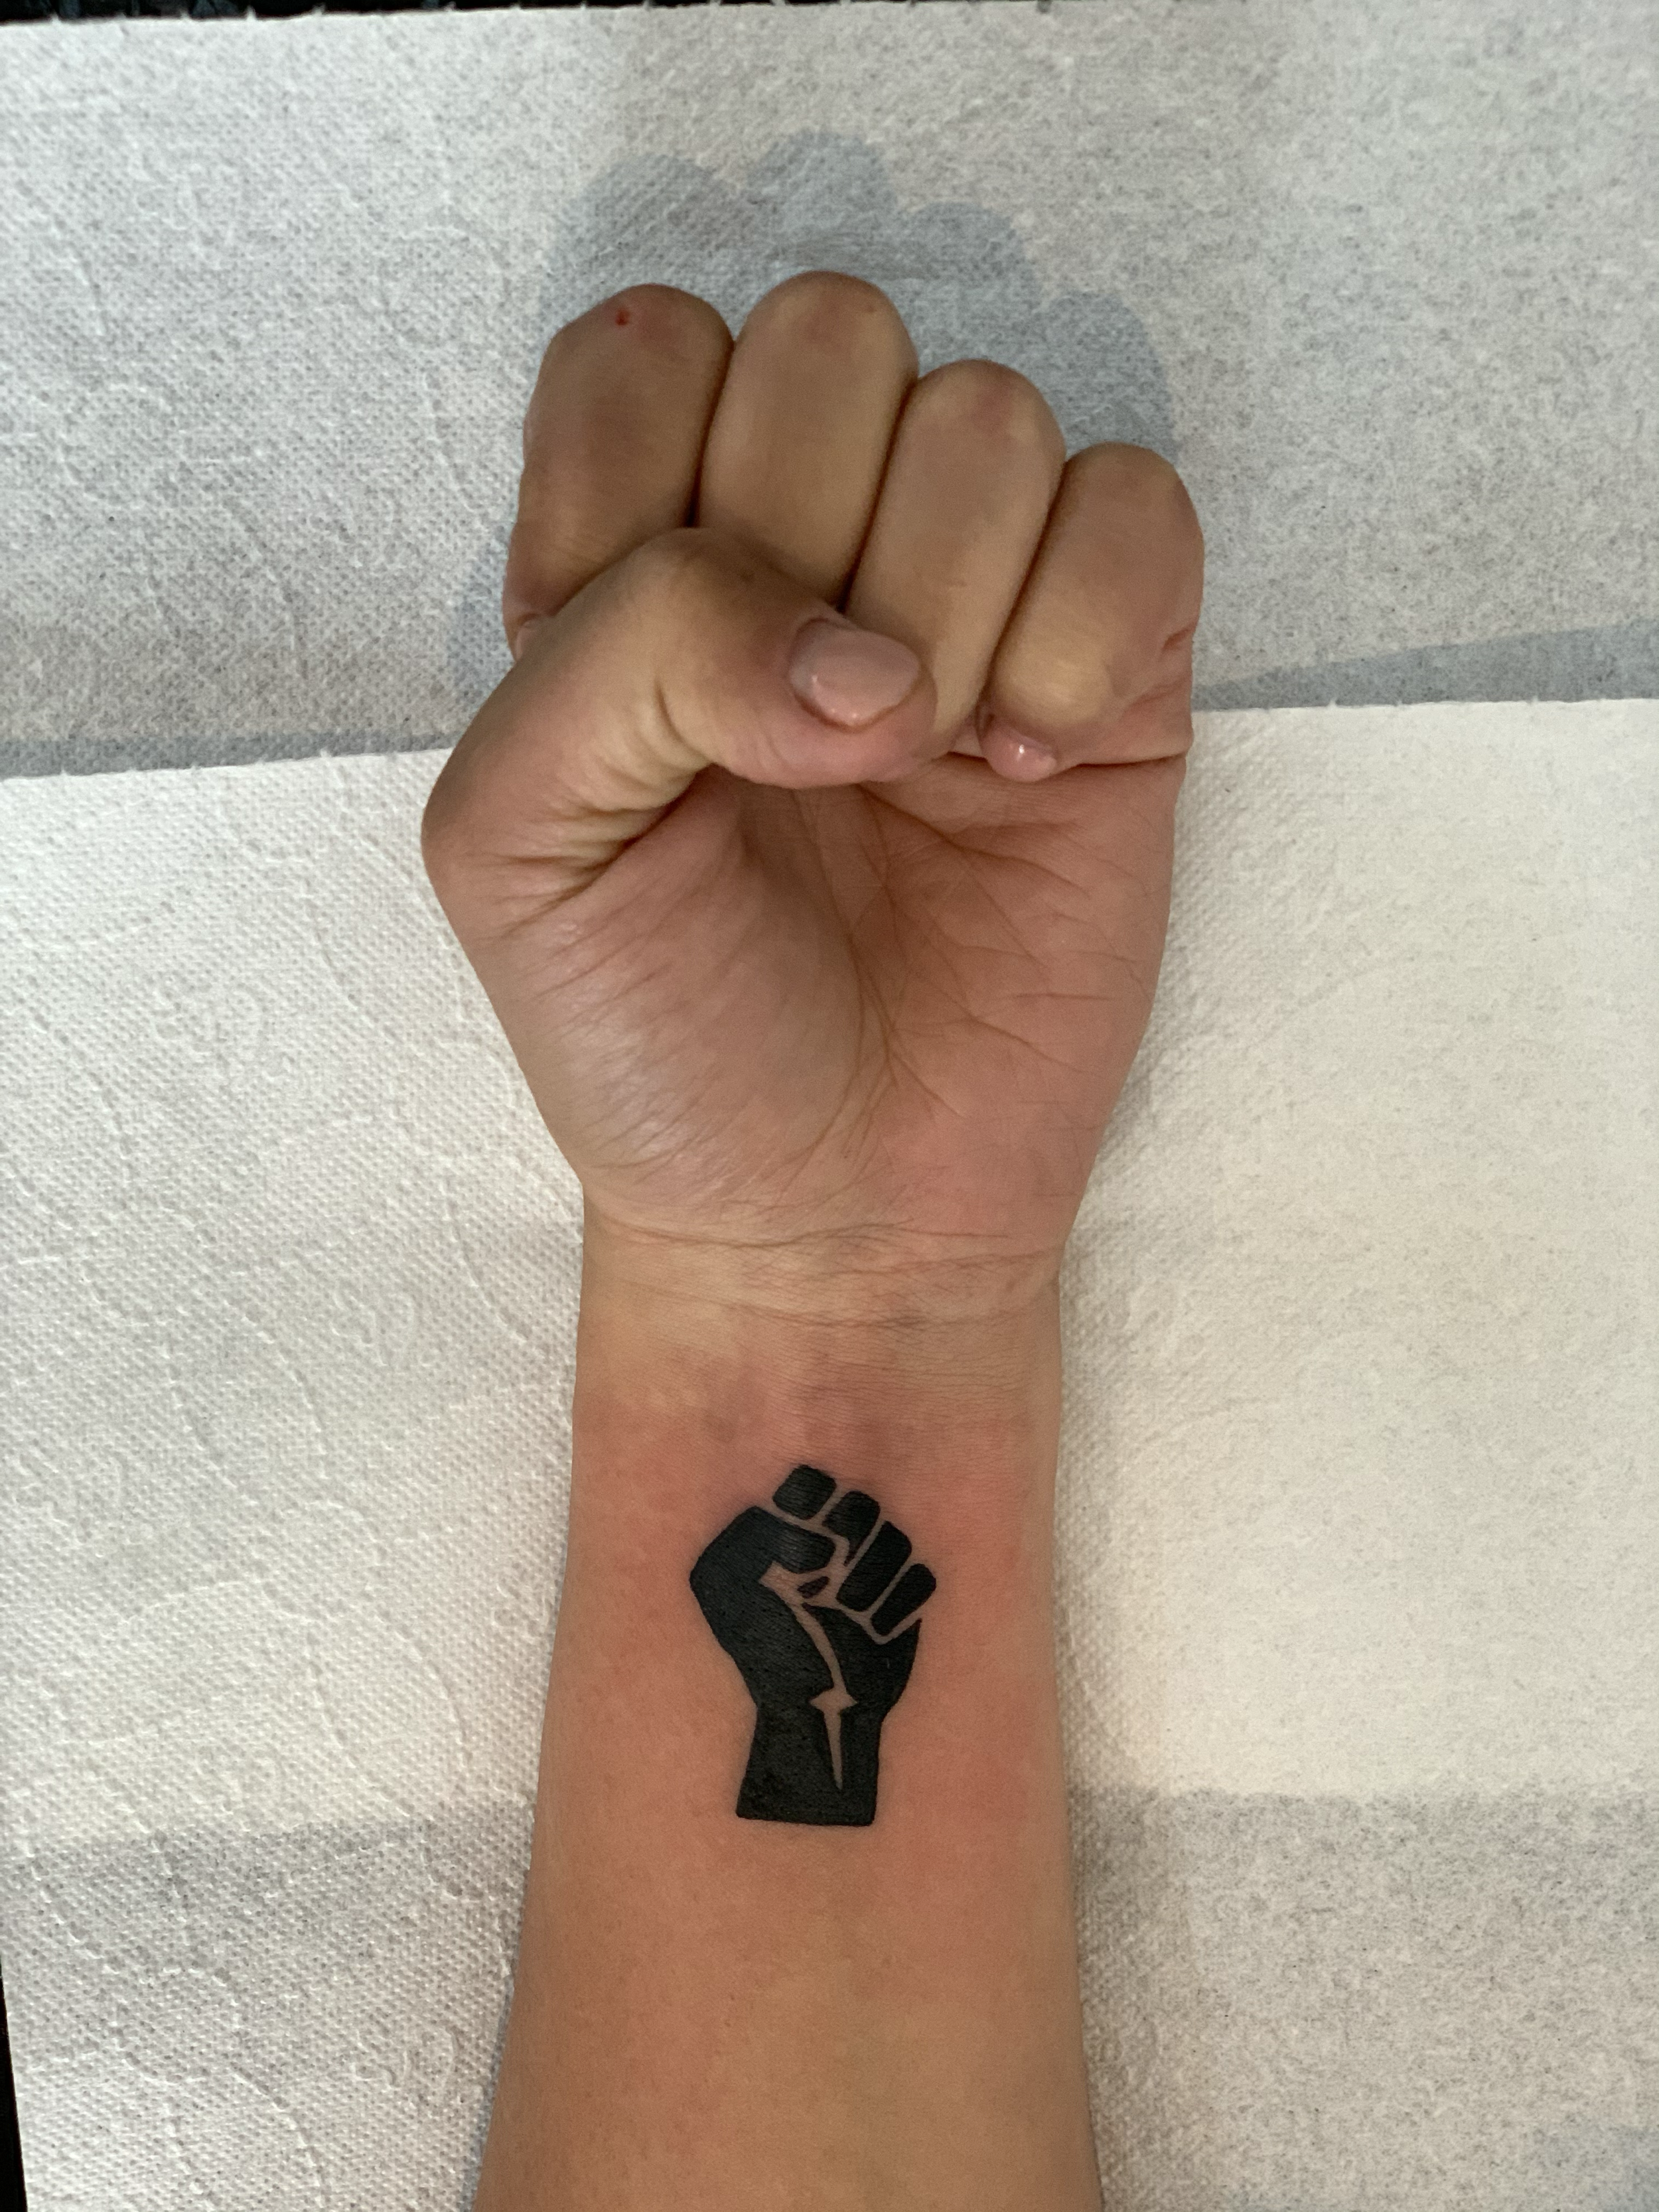 650 Black Fist Tattoo Stock Photos Pictures  RoyaltyFree Images  iStock